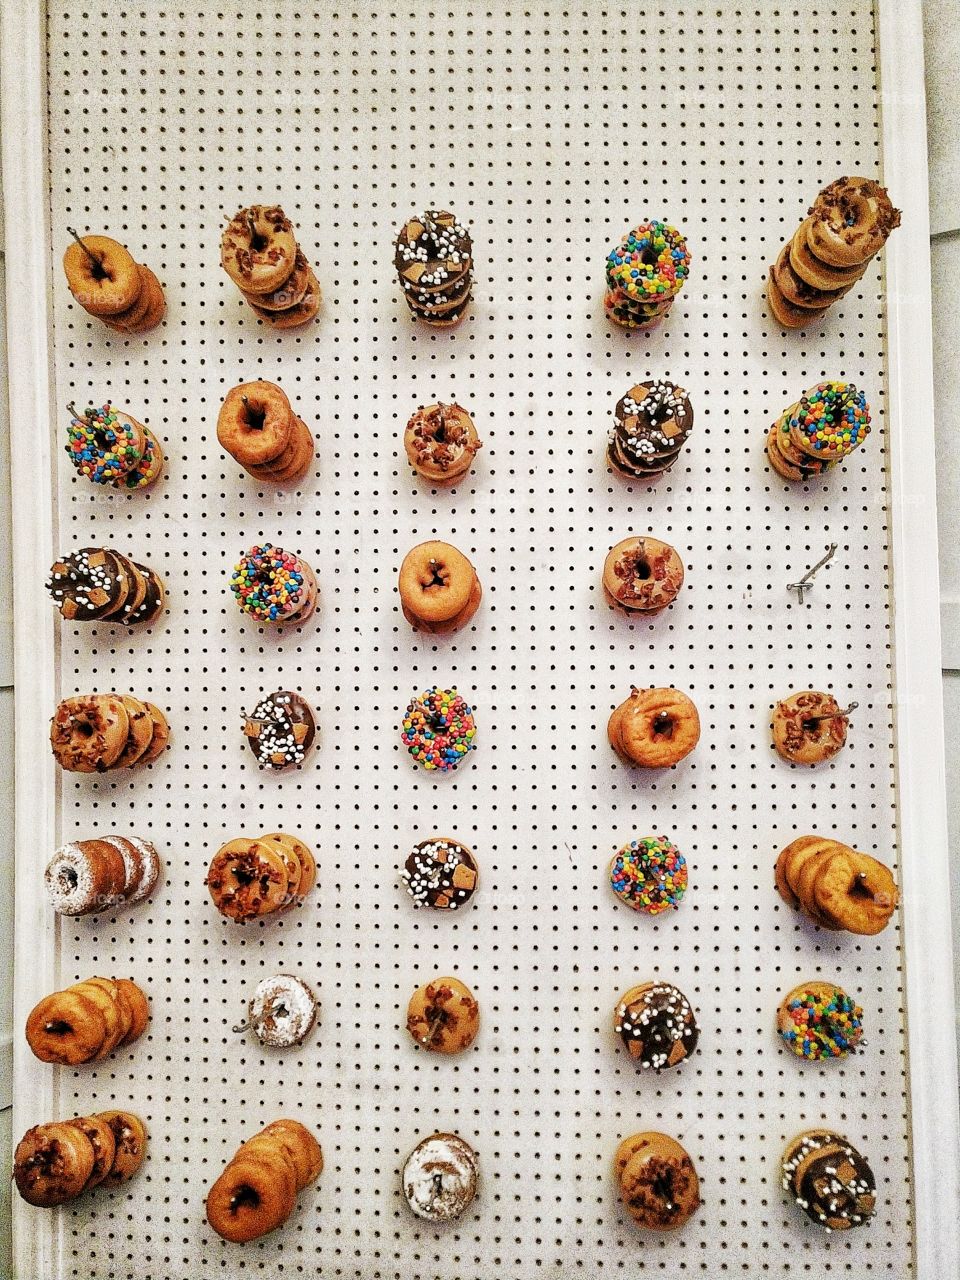 Wall of a Variety of Tasty Doughnuts